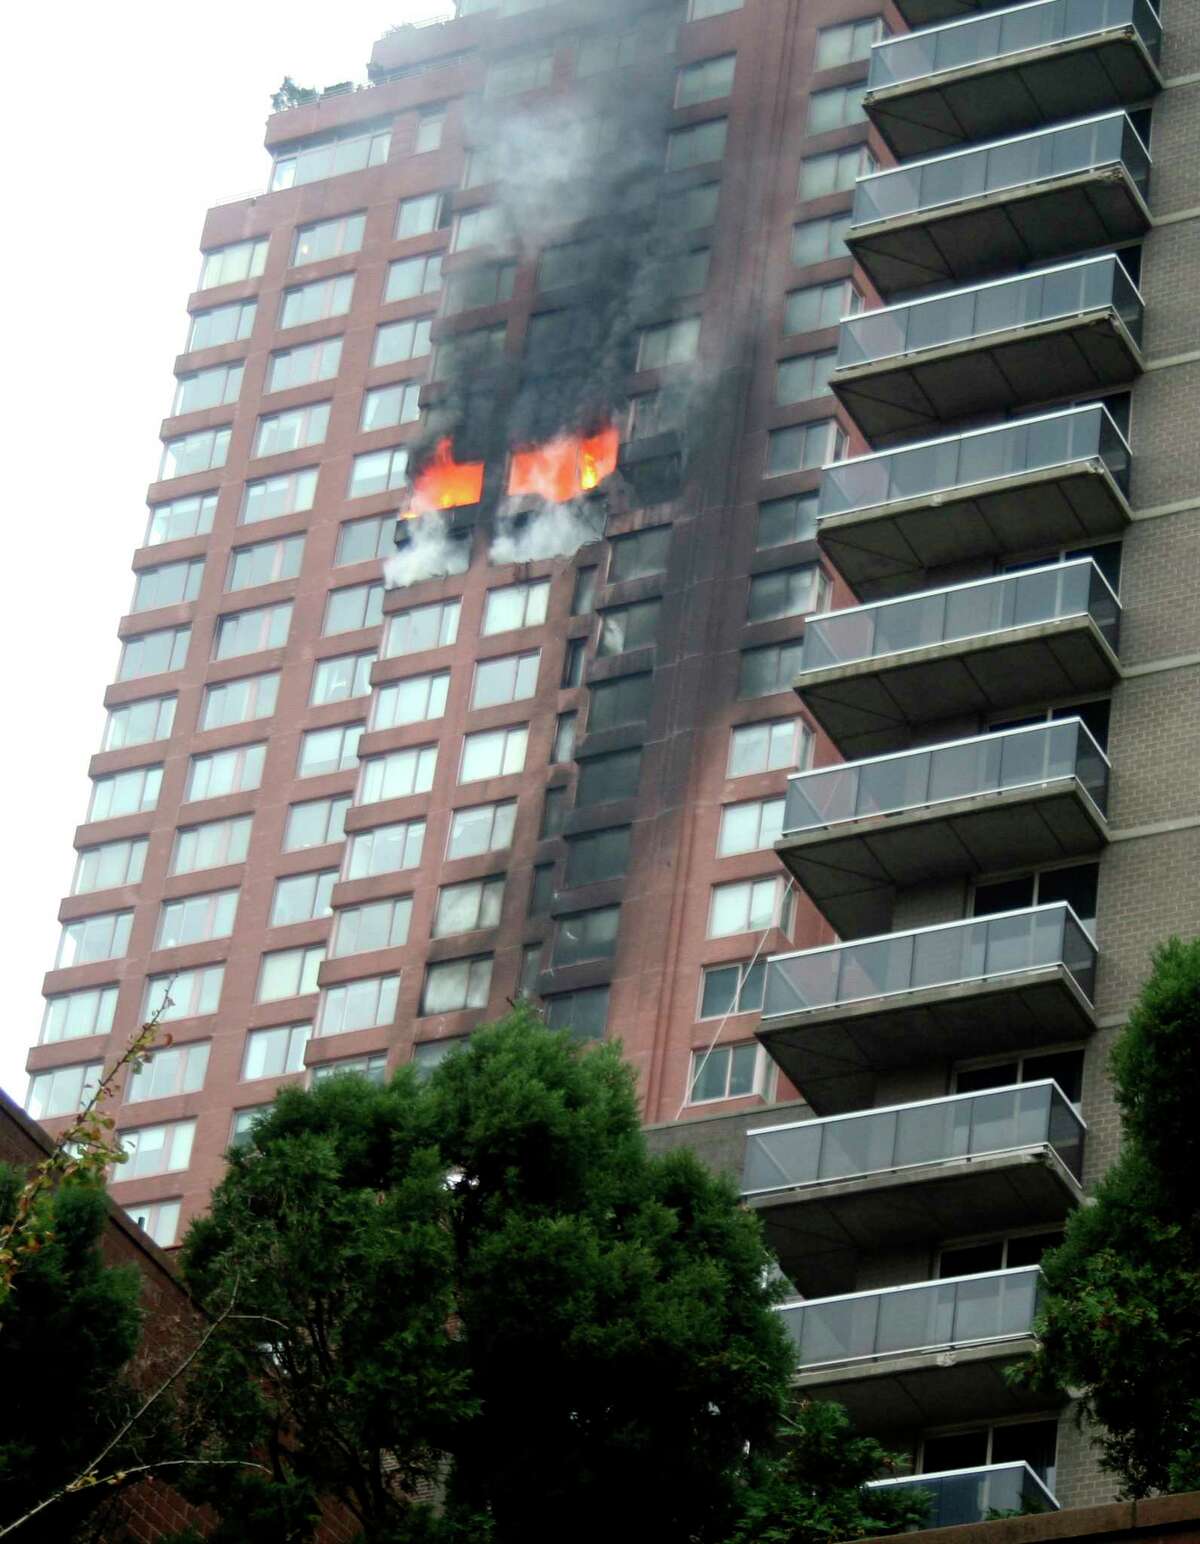 FILE- In this Oct. 11, 2006 file photo, a fire burns in the apartment where a small plane crashed into a 50-story residential building in New York. Fire safety experts recommend that you "stay put" If a fire breaks out elsewhere in the building. They say that it's best advice as long as the building has proper fire suppression protections, like a sprinkler system, fireproof doors and flame-resistant construction materials. (AP Photo/Larry LeVine, File) ORG XMIT: NYR403